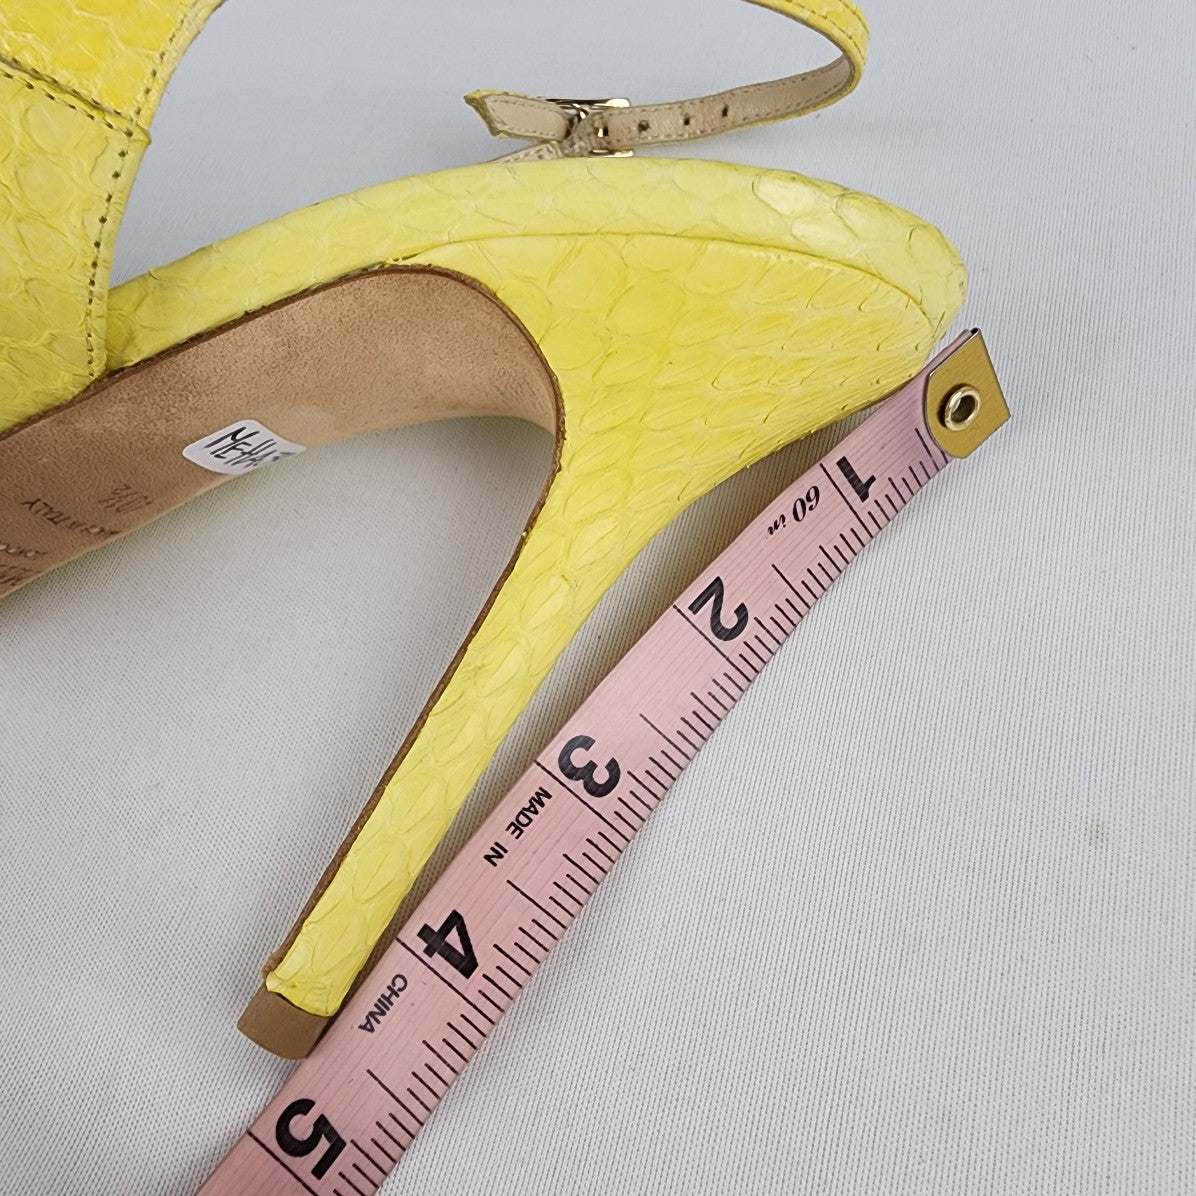 Jimmy Choo Yellow Snake Skin Pointed Toe Sling Back Pumps Size 9